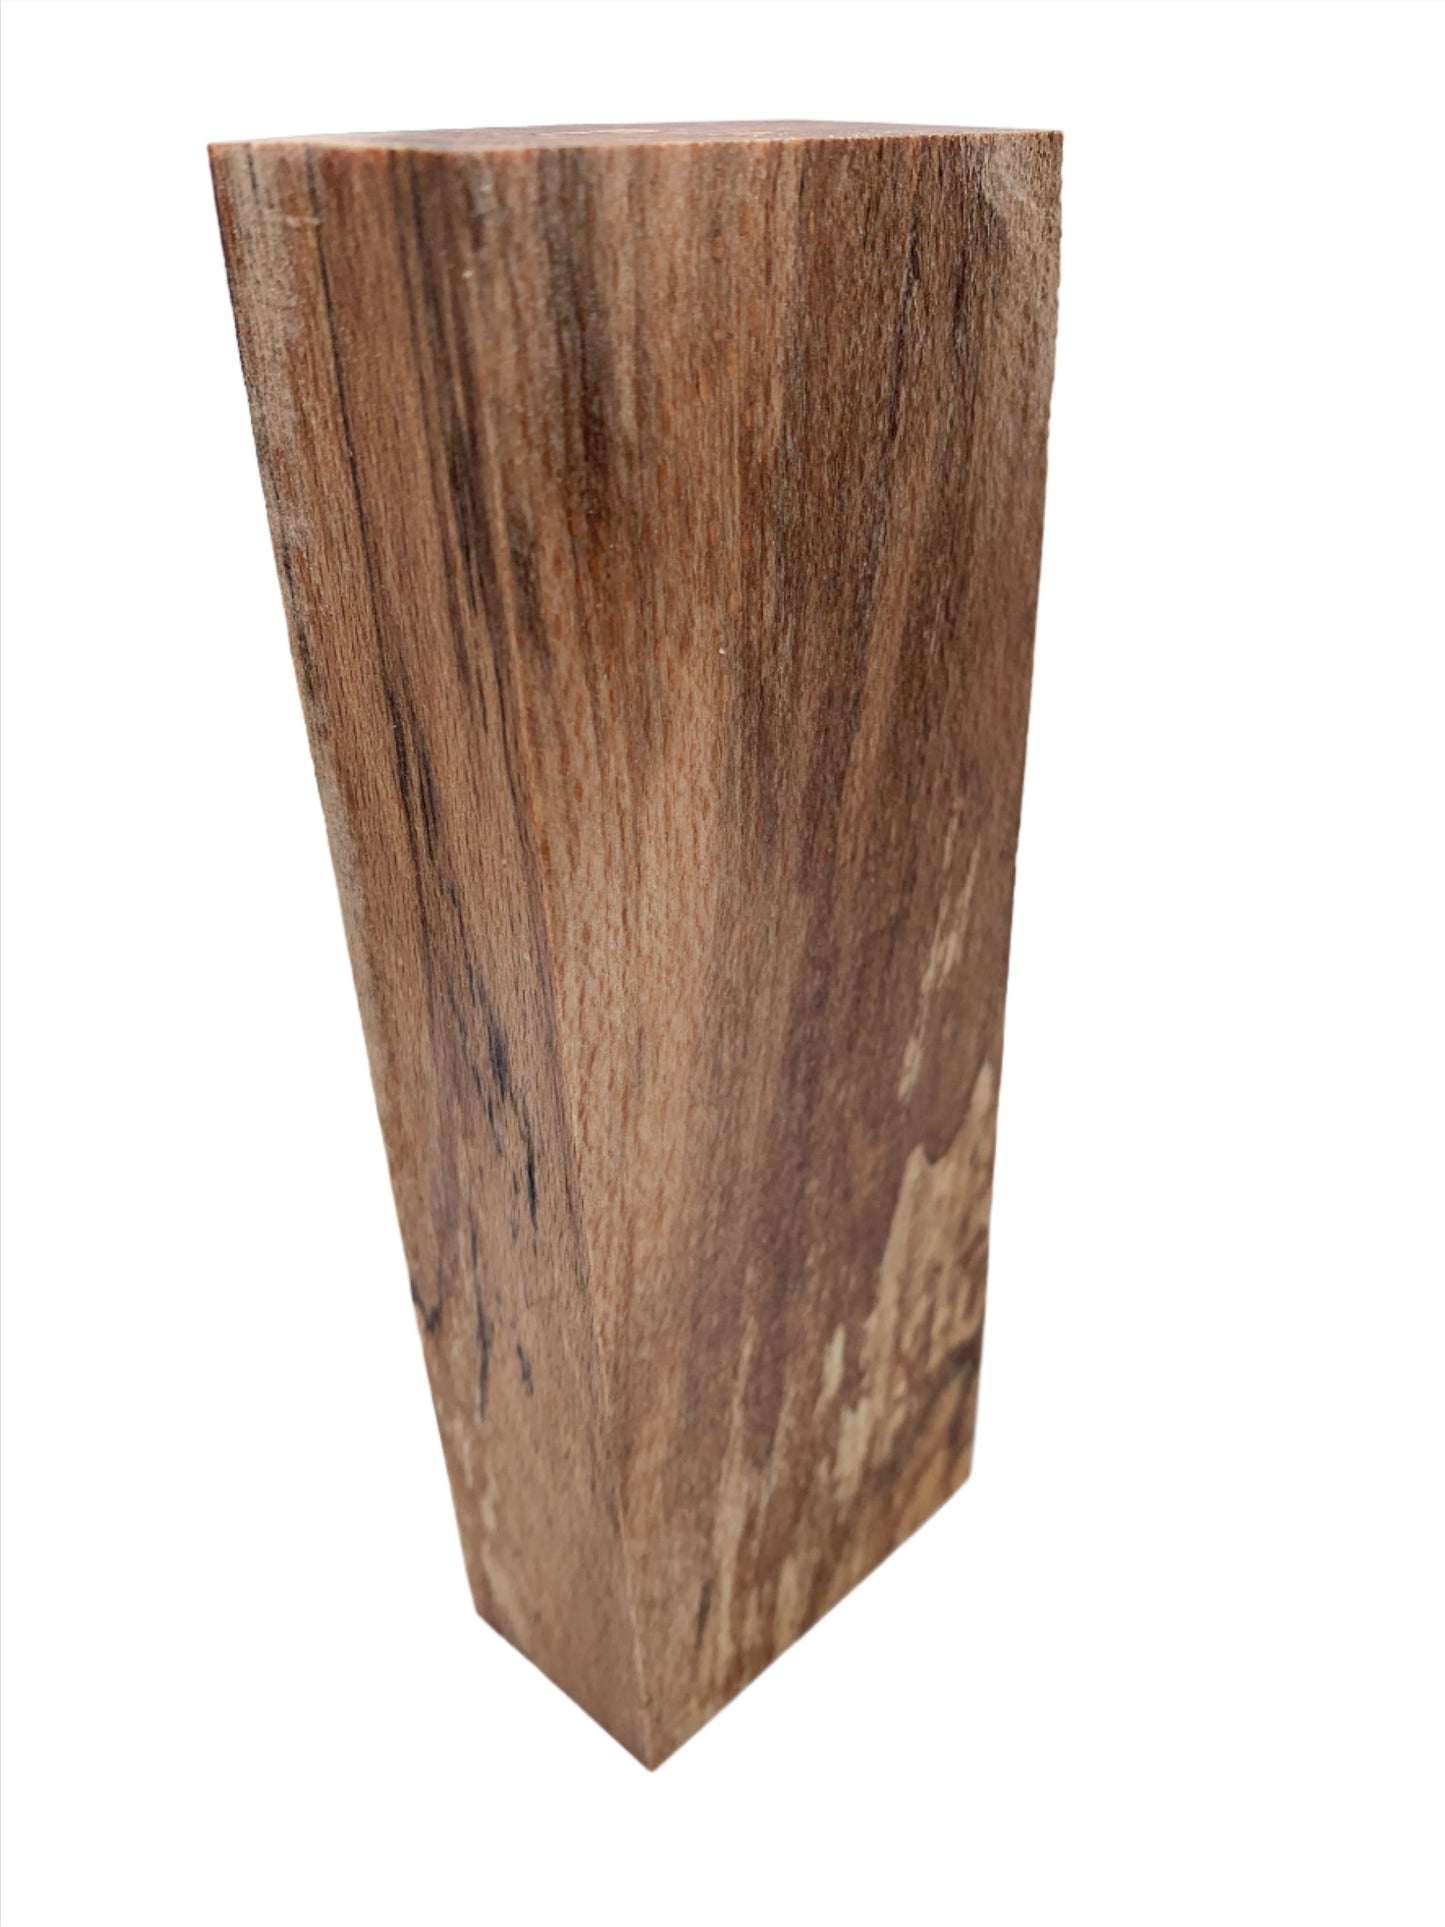 Spalted Beech Wood Knife Scale / Craft Blank | Fully Stabilised | 148x56x28 | Wooden Knife Handle